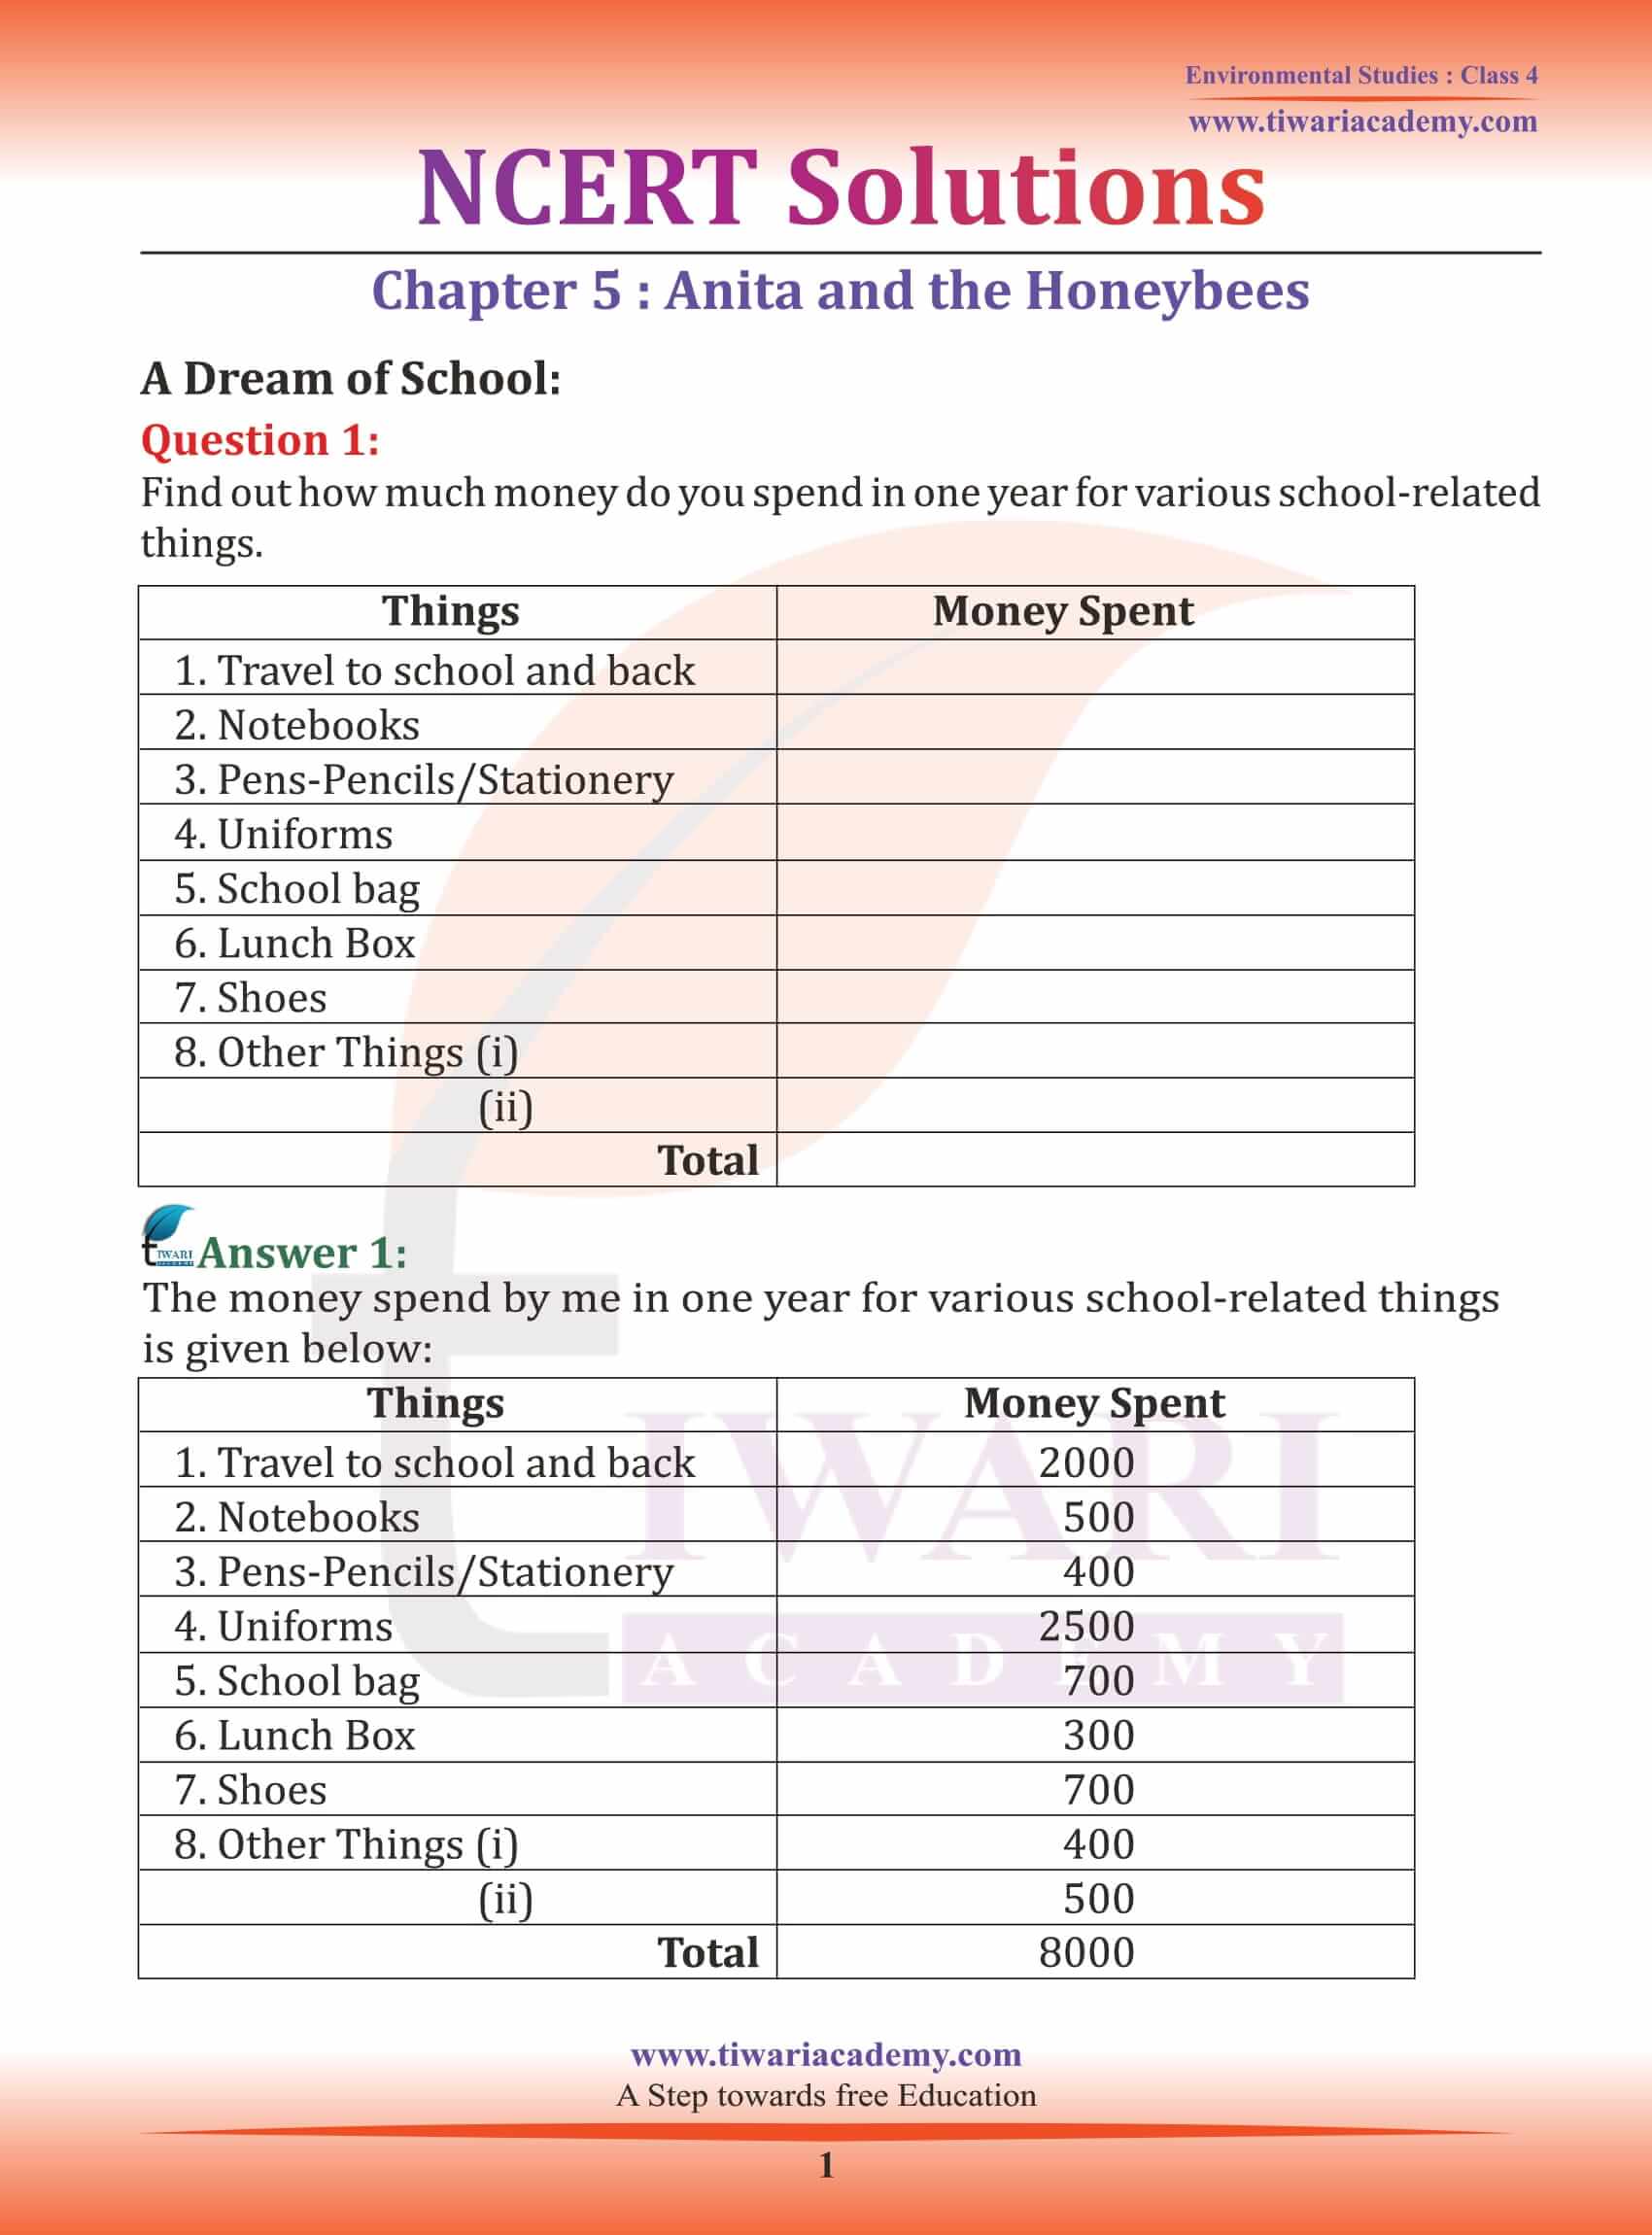 NCERT Solutions for Class 4 EVS Chapter 5 Anita and the Honeybees